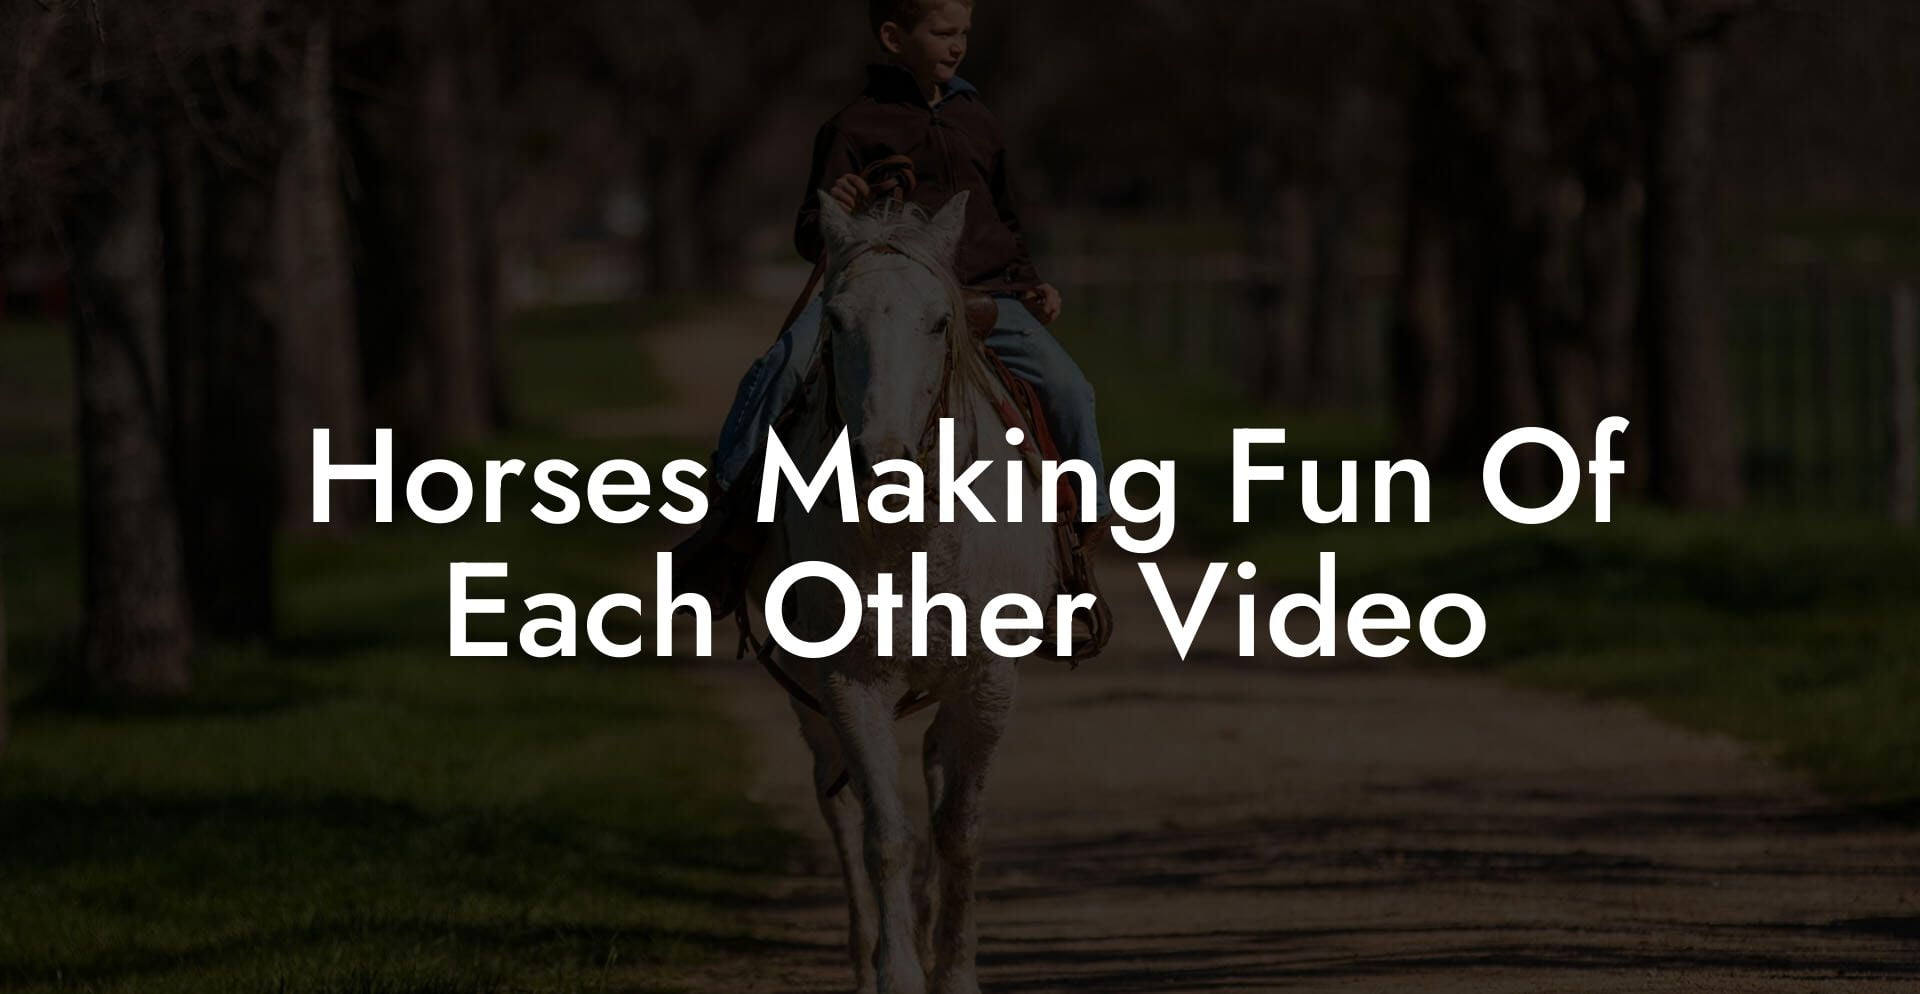 Horses Making Fun Of Each Other Video